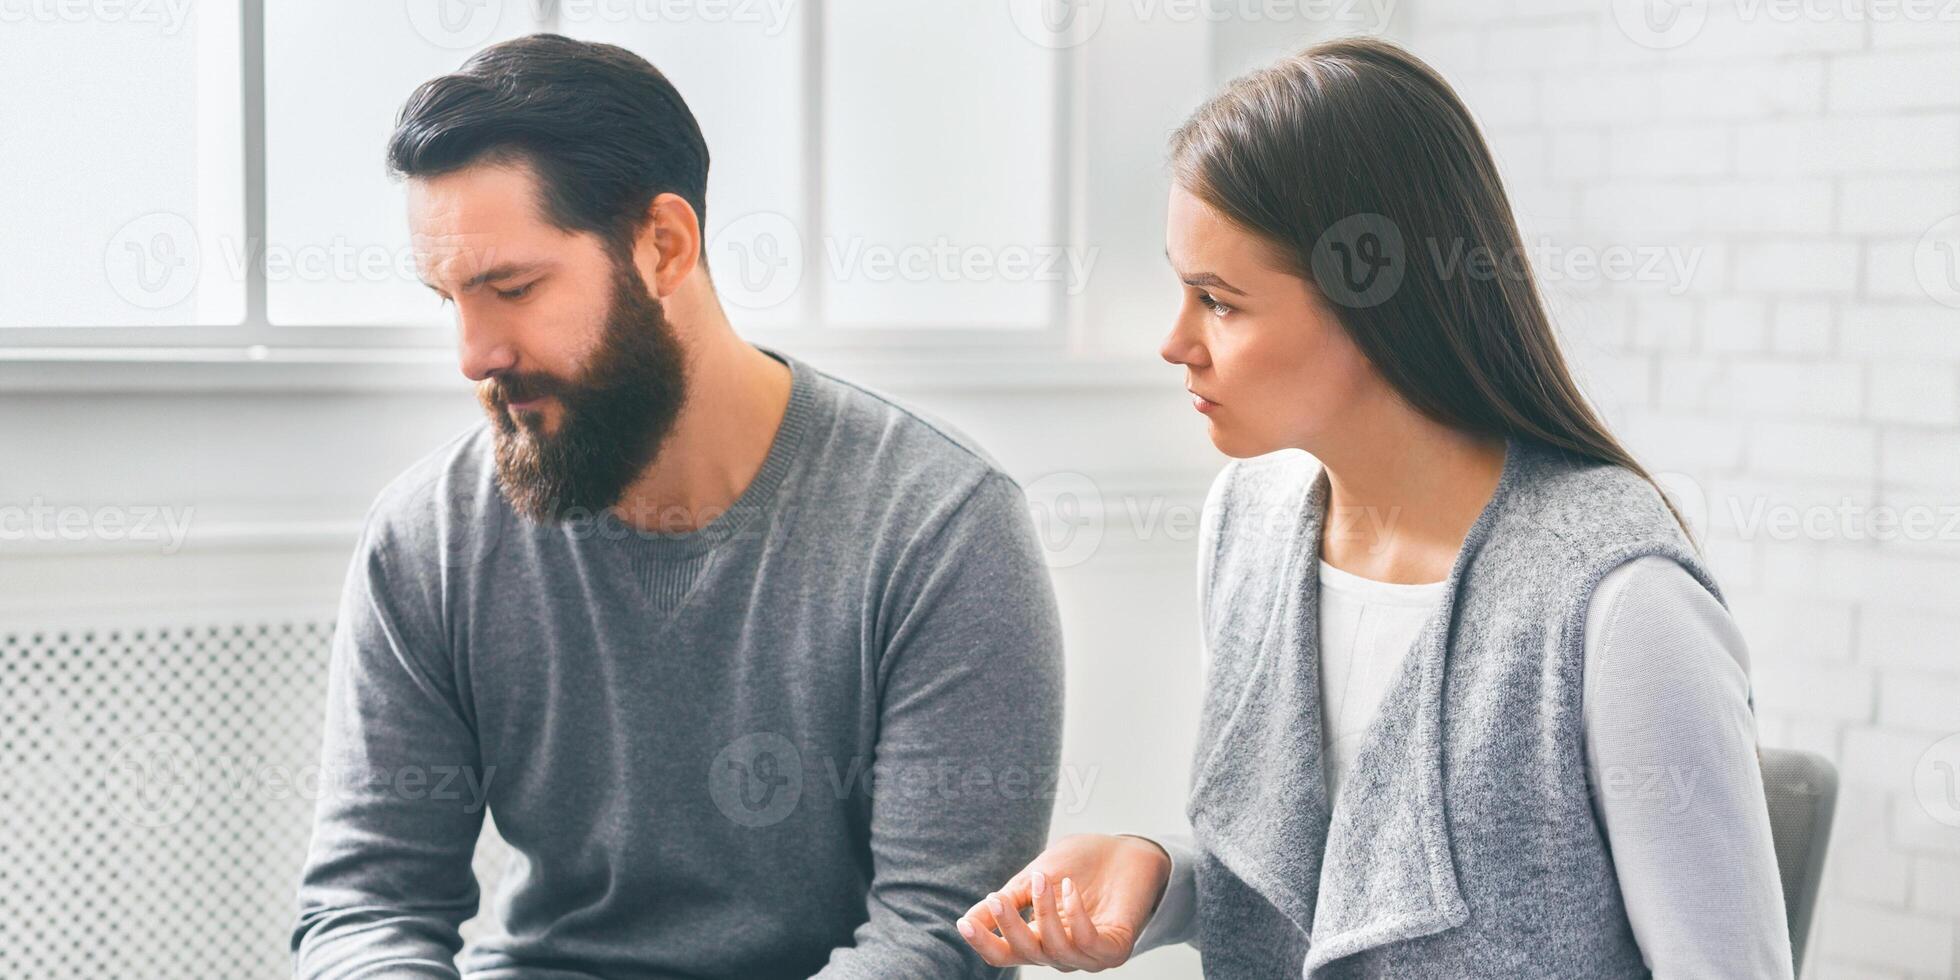 Disappointed wife blaming her depressed husband at marriage counselling session photo